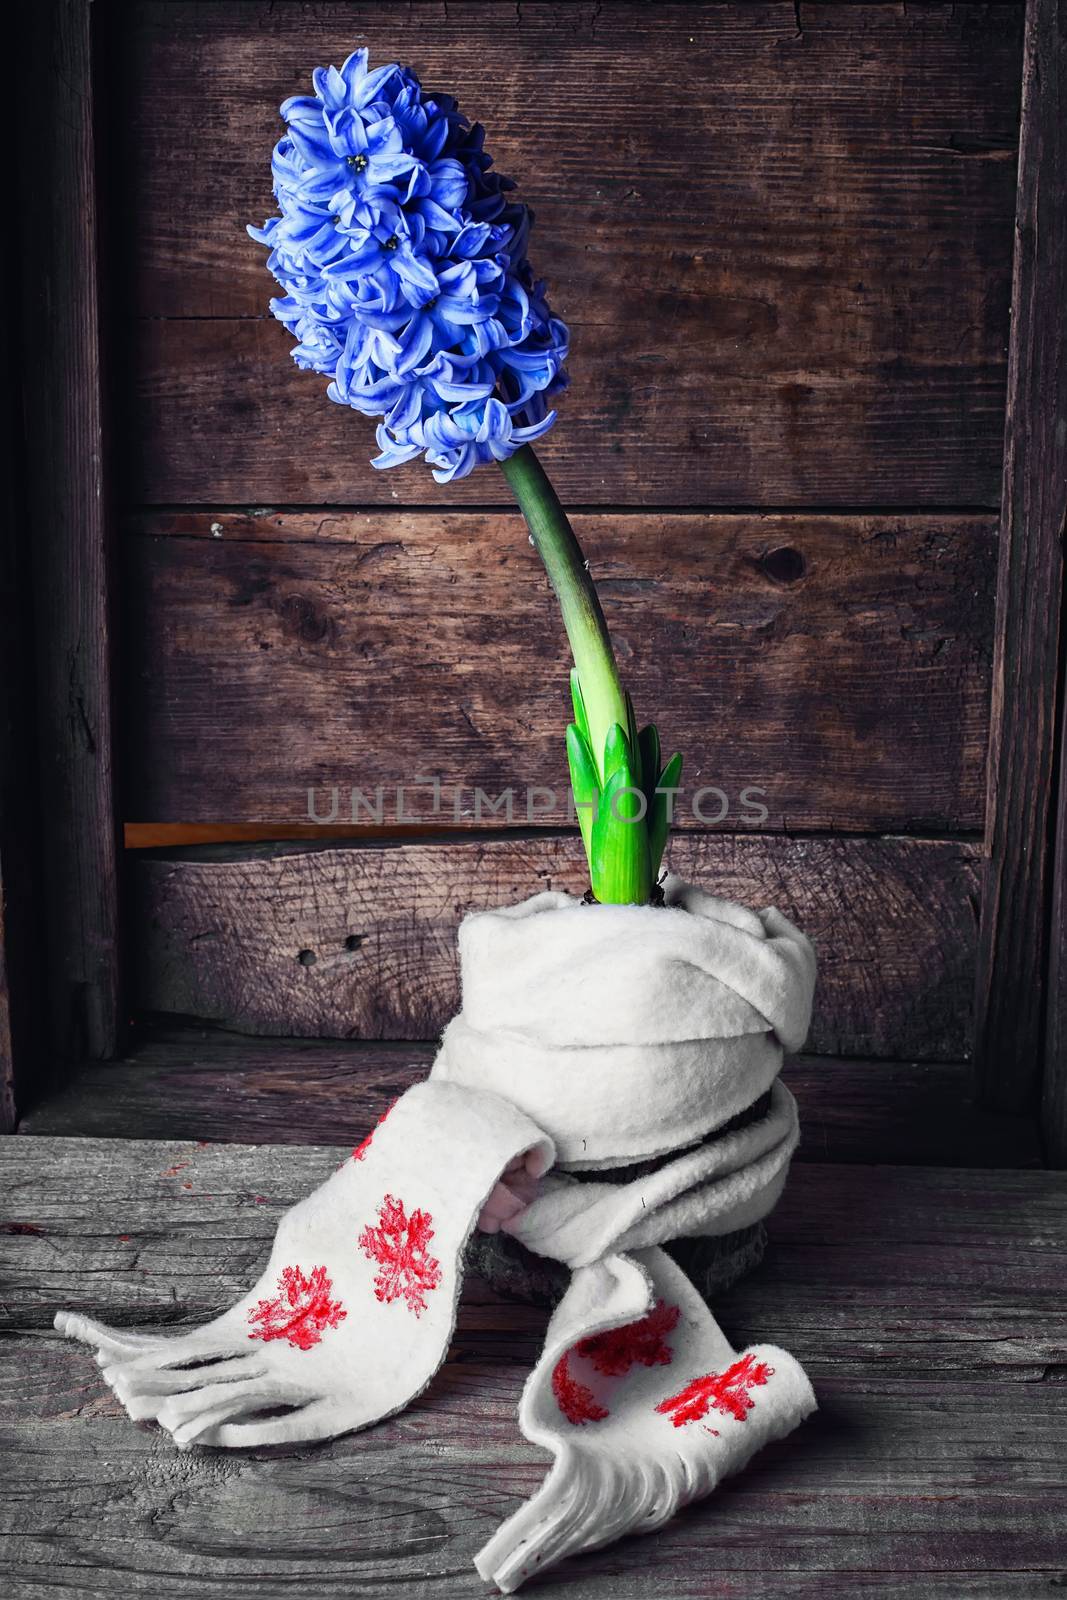 Blooming blue hyacinth wrapped in warm scarf on wooden background